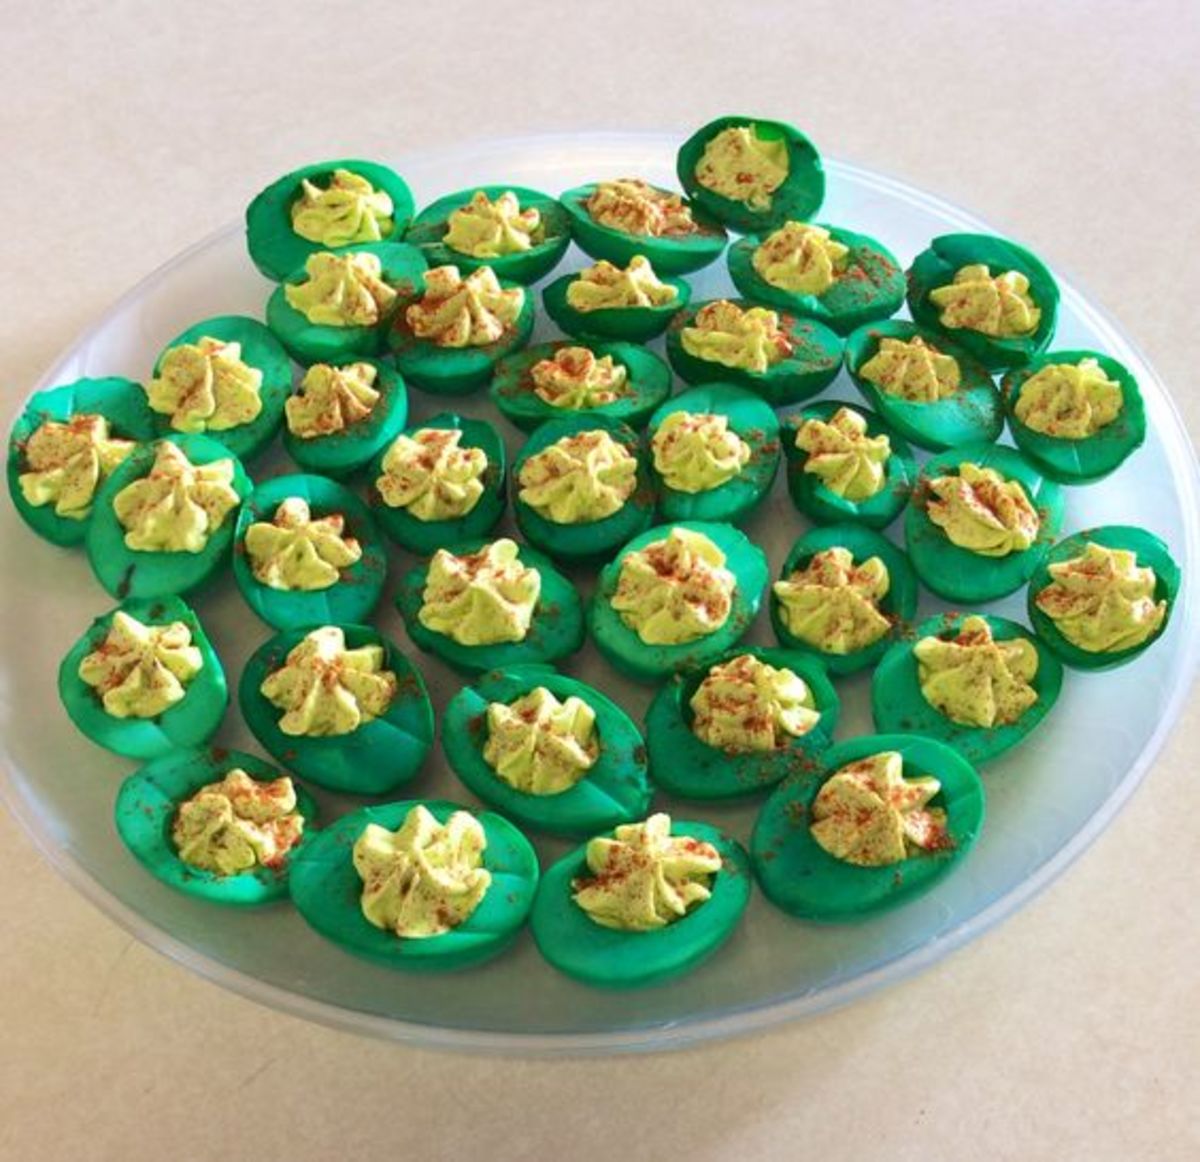 Green Deviled Eggs With Yellow Yolks